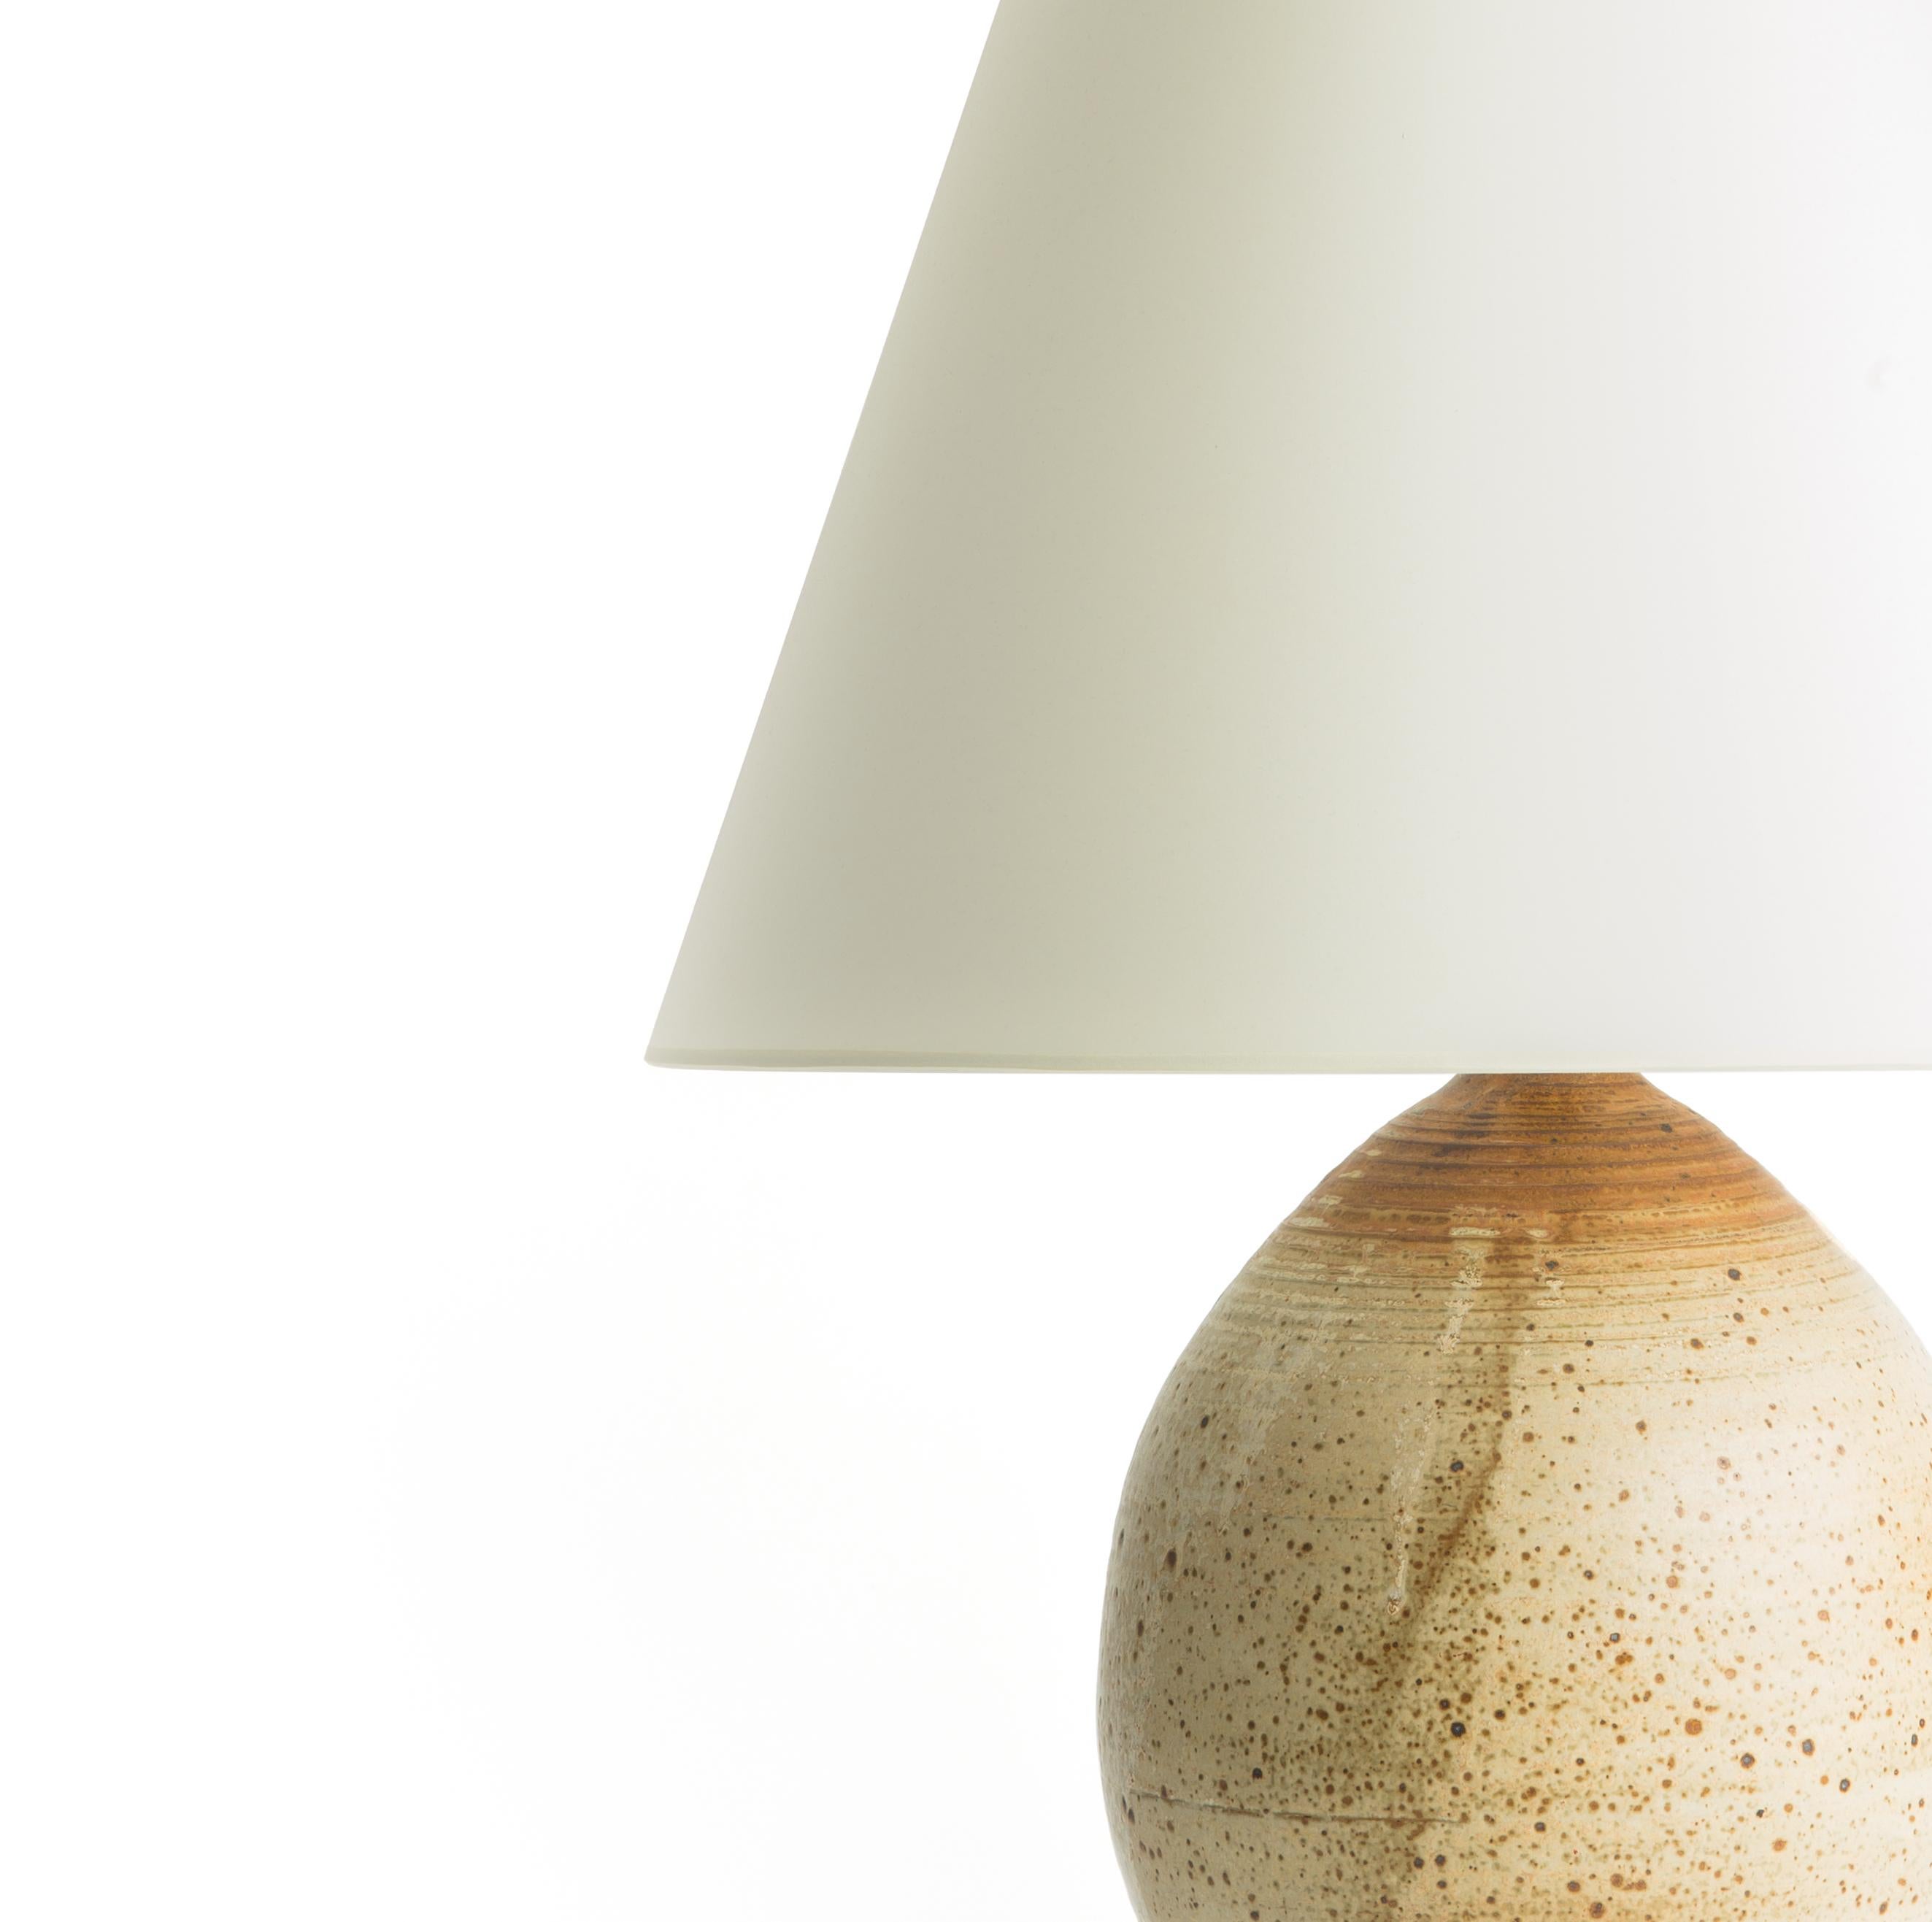 Gourd ceramic table lamp with textured surface.

Custom burnished nickel base fitted to the base.

Wired to US standards with rotary dimmer switch, braided cloth cord.

Shade not included.